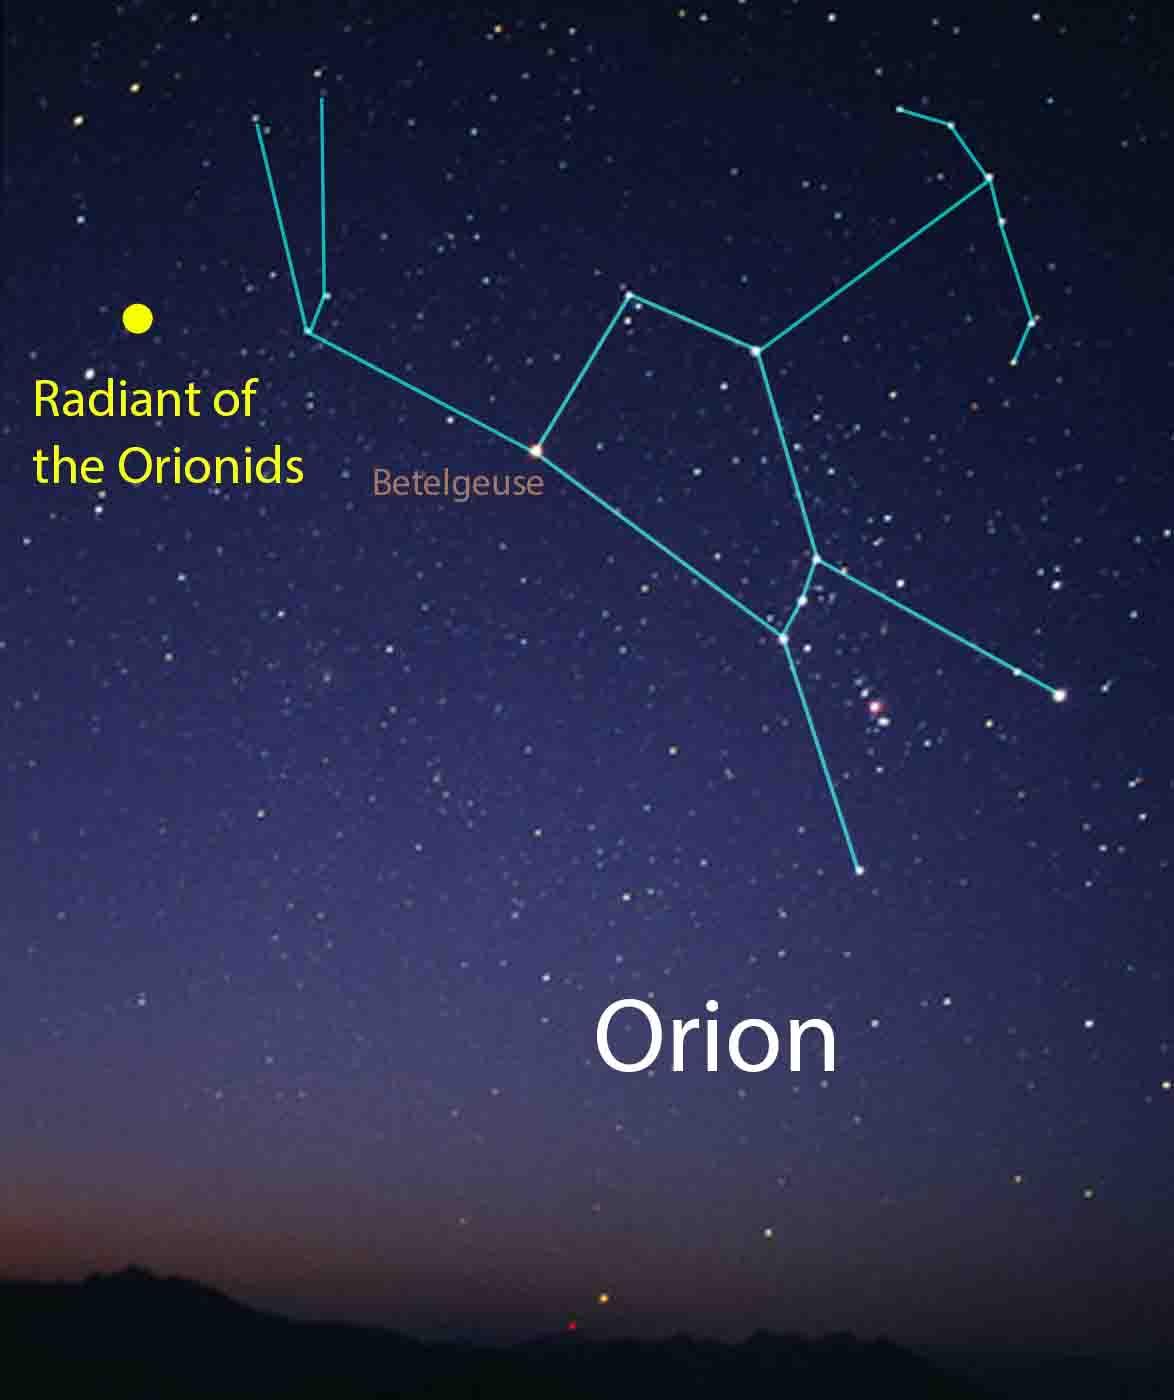 The Orionids' radiant point next to the constellation Orion, toward the east. (This image has been edited. Till Credner/<a href="https://commons.wikimedia.org/wiki/File:OrionCC.jpg">CC BY-SA 3.0</a>)